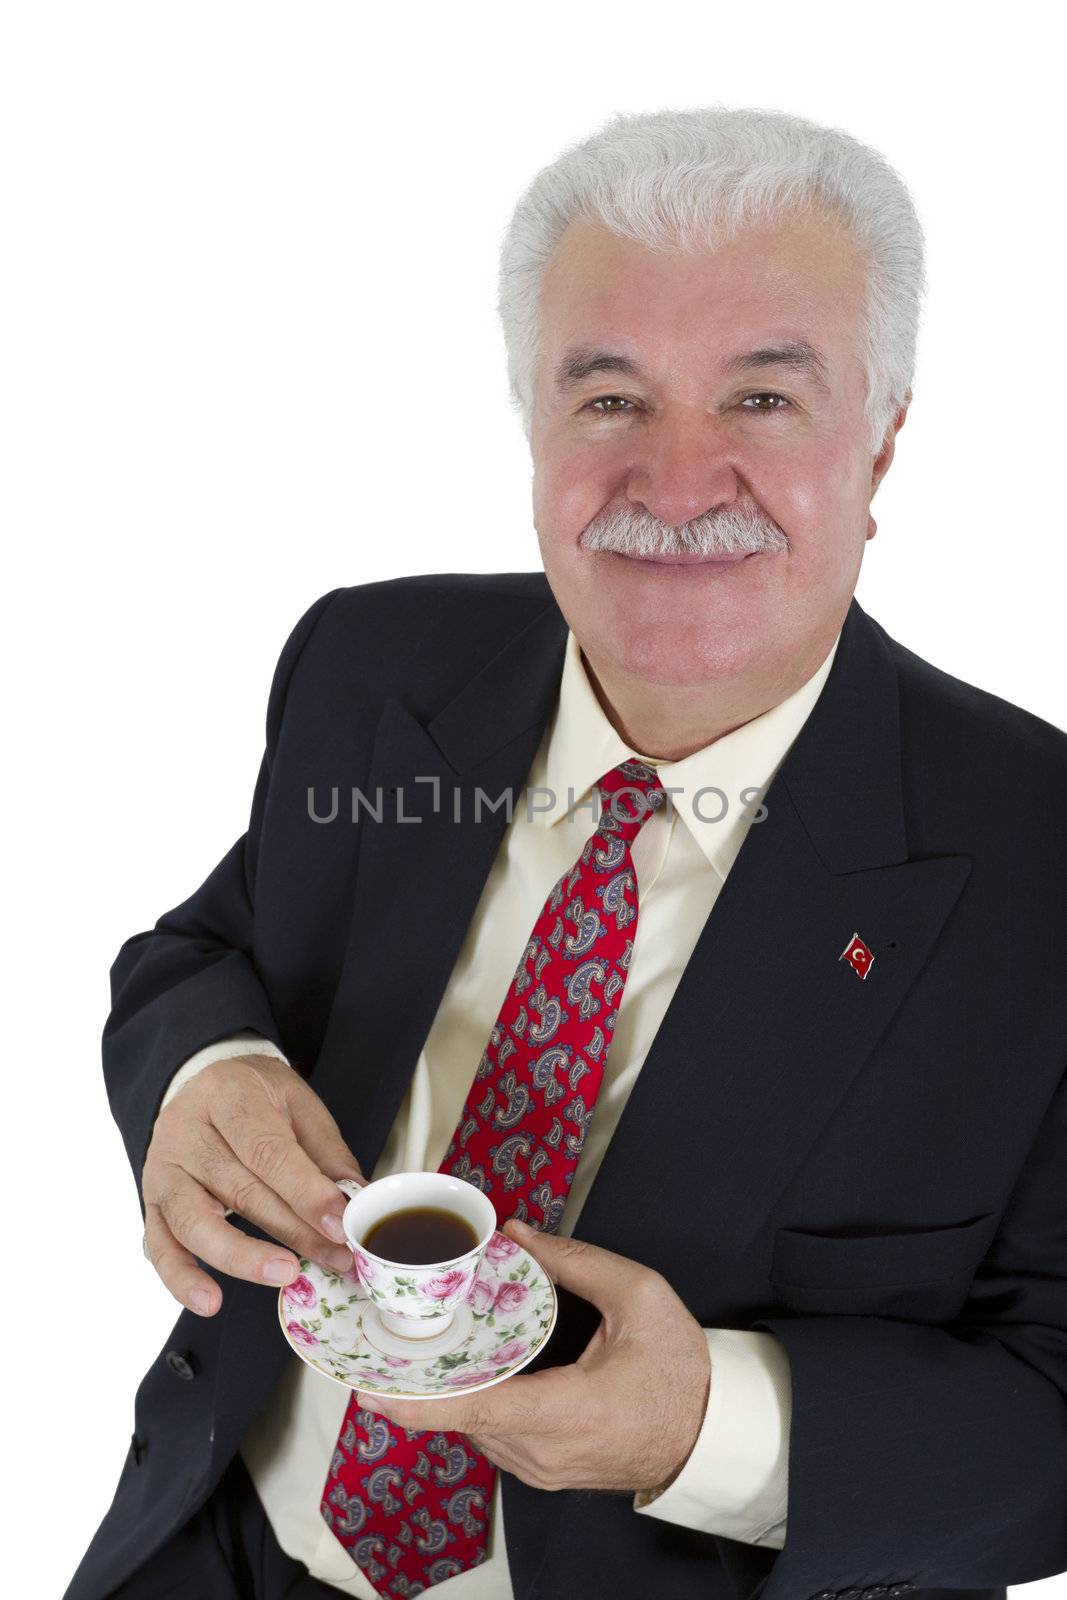 Turkish business man drinking his coffee, wearing red tie and suit. Isolated on white.